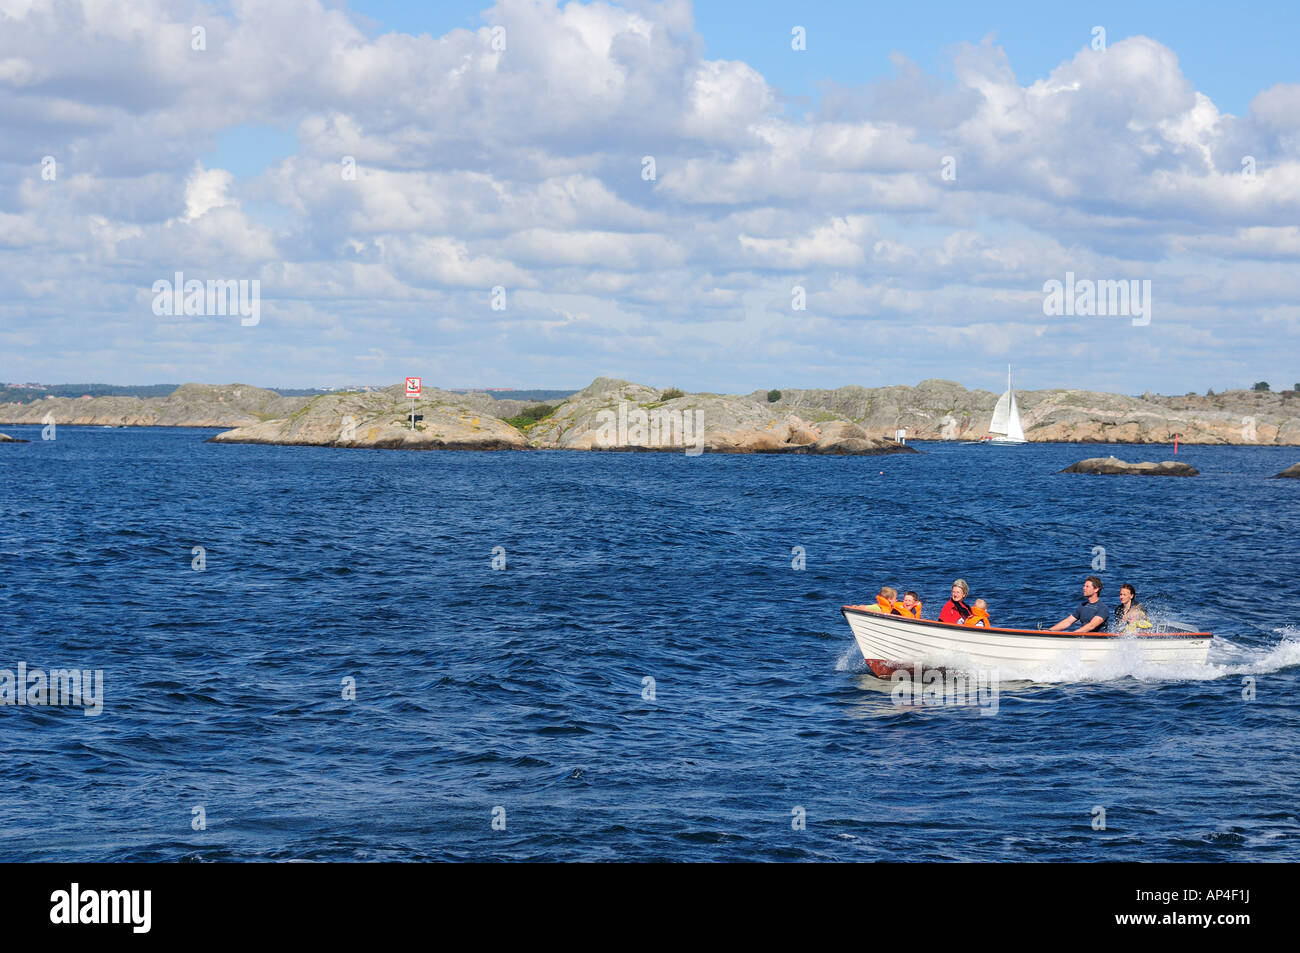 Tourists riding in boat, Sweden Stock Photo